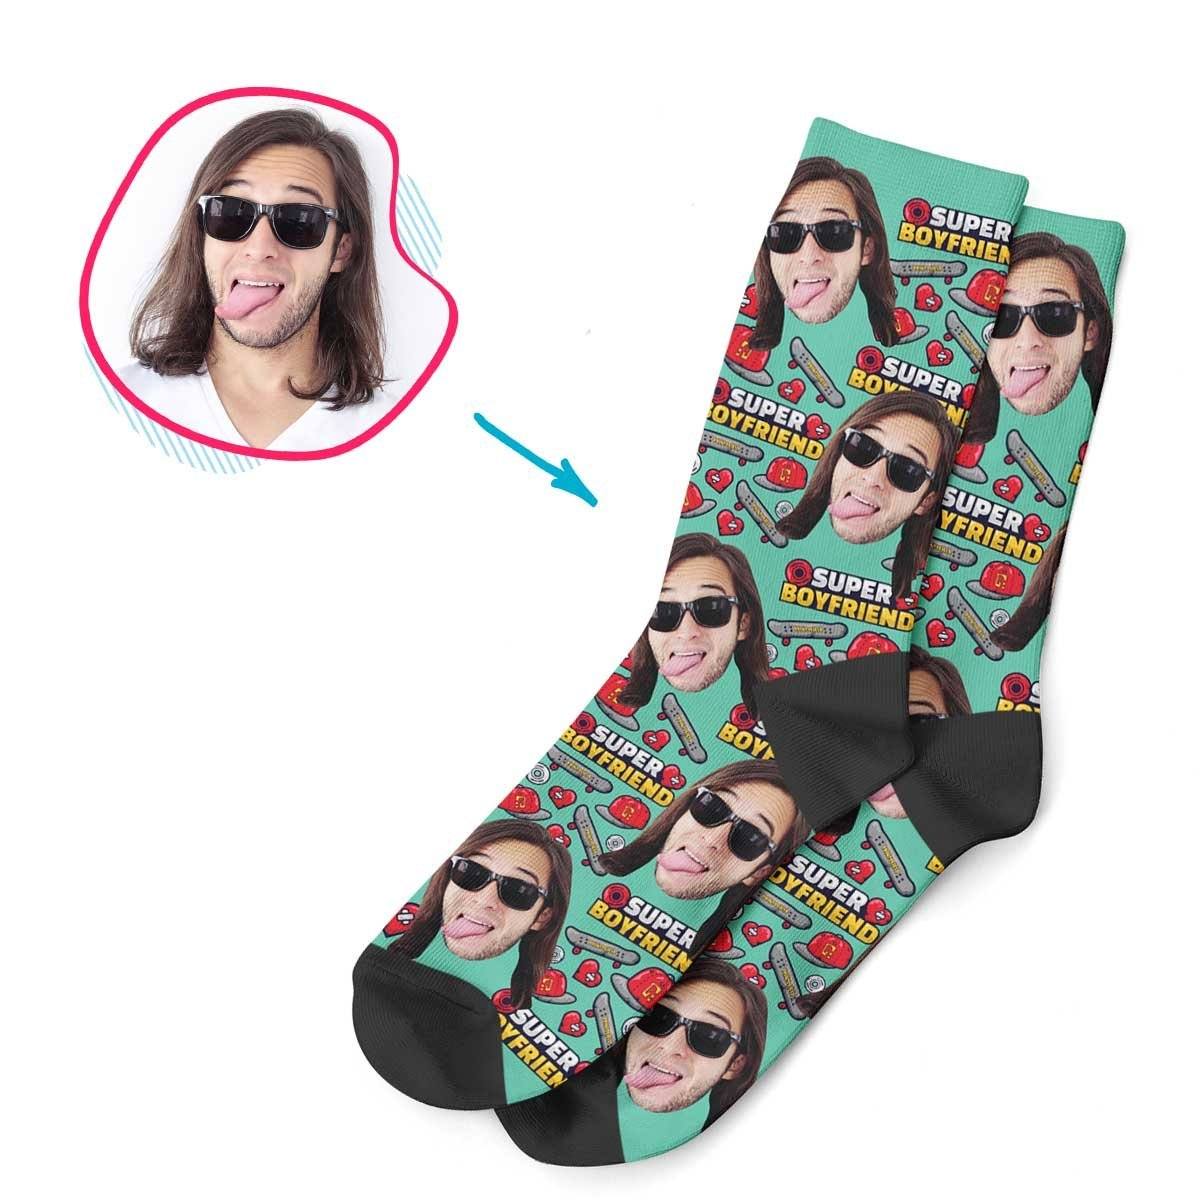 Mint Boyfriend personalized socks with photo of face printed on them